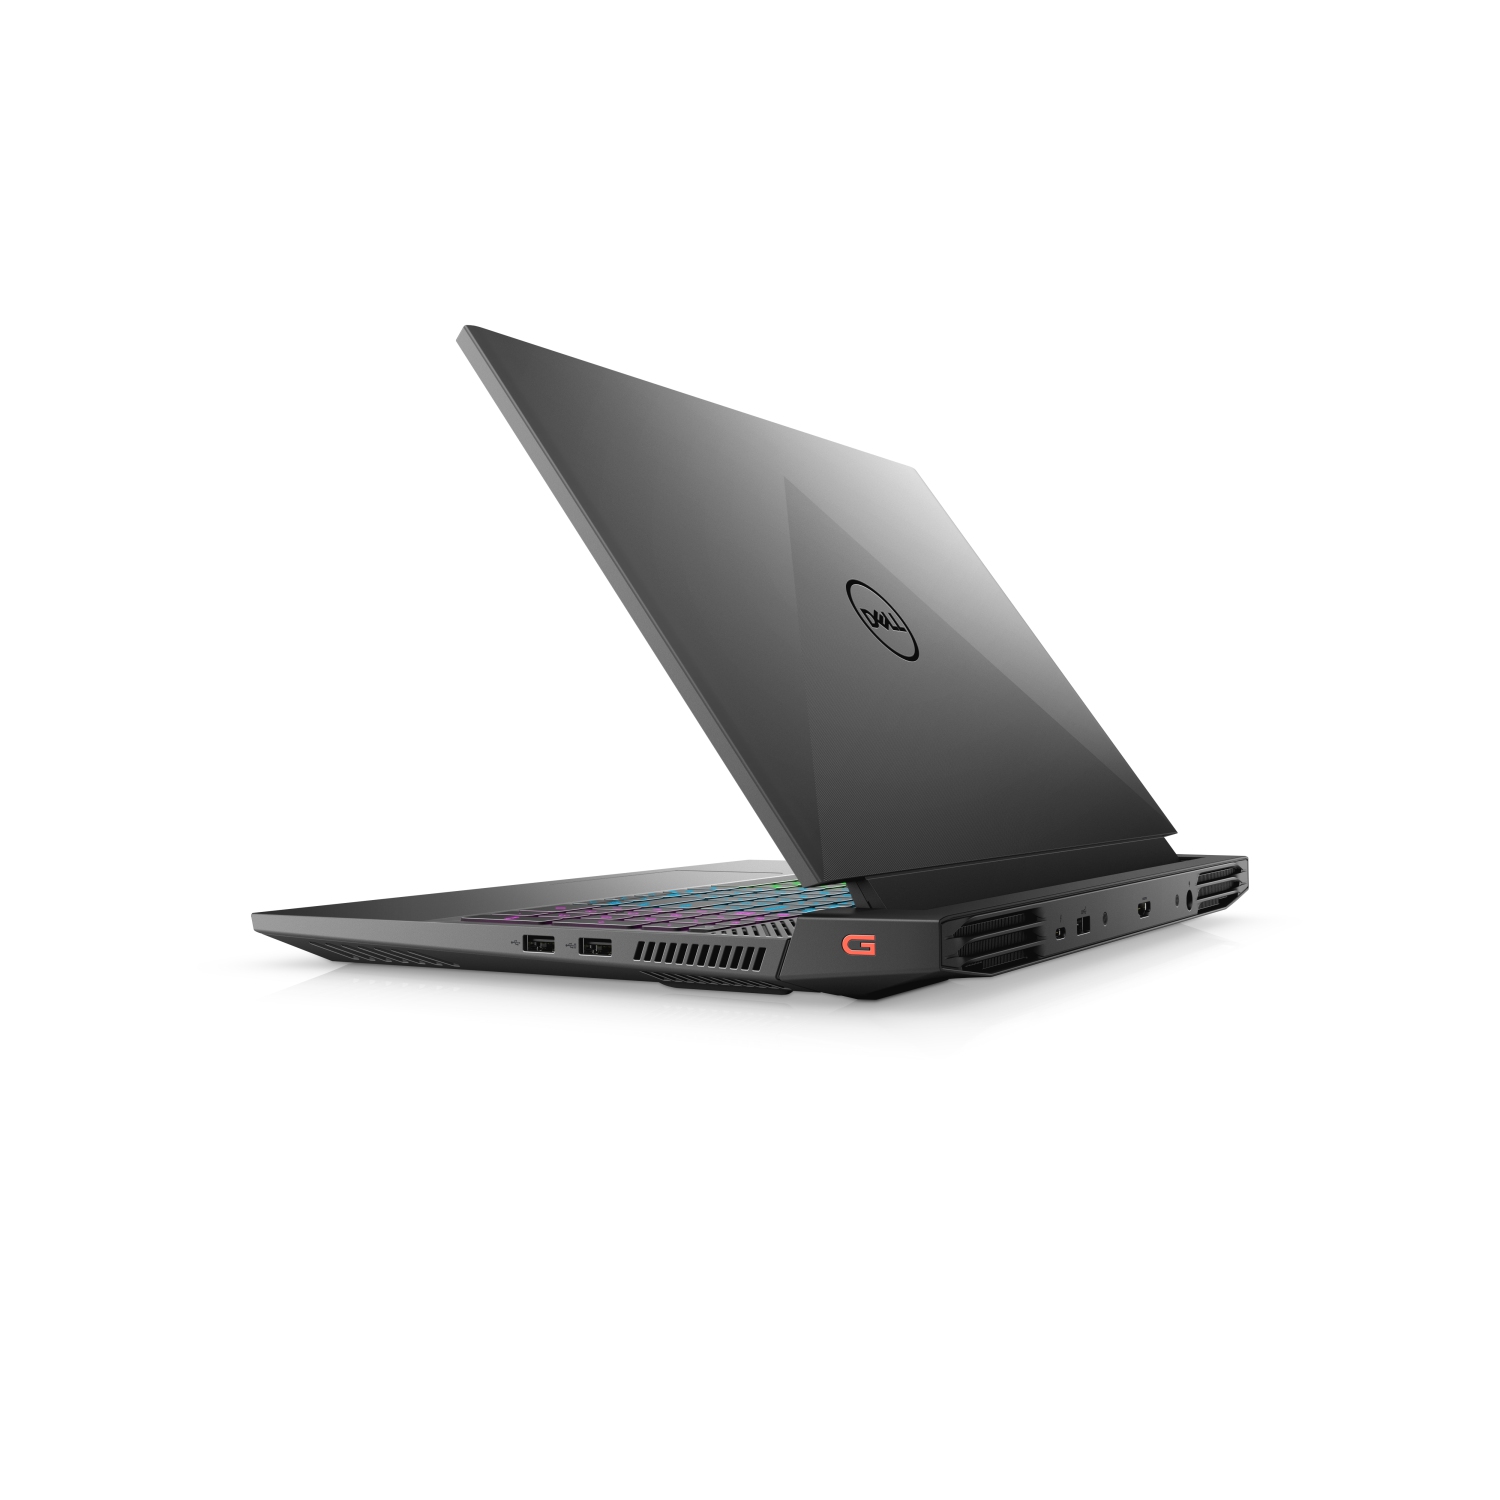 Refurbished (Excellent) – Dell G15 5511 Gaming Laptop (2021) | 15.6" FHD | Core i5 - 512GB SSD - 8GB RAM - RTX 3050 | 6 Cores @ 4.5 GHz - 11th Gen CPU